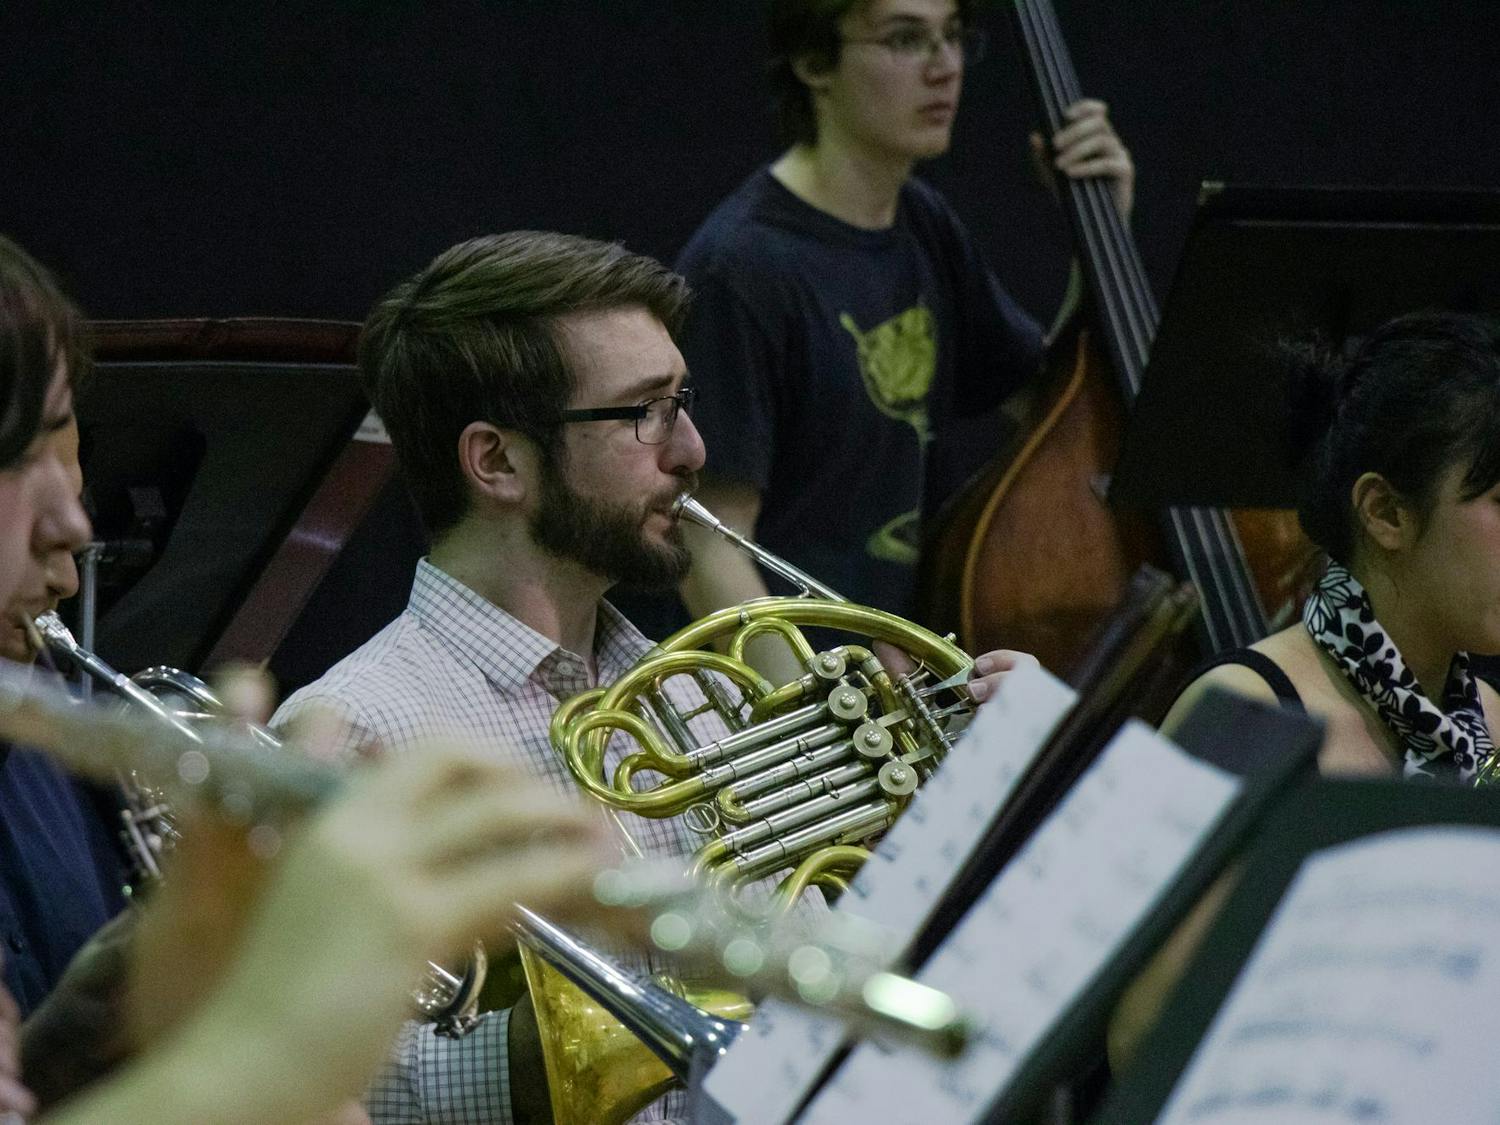 A University of South Carolina ɫɫƵ plays the French horn during a wind ensemble rehearsal on March 21, 2024. The ɫɫƵ Wind Ensemble is open to ɫɫƵs of all majors by audition.